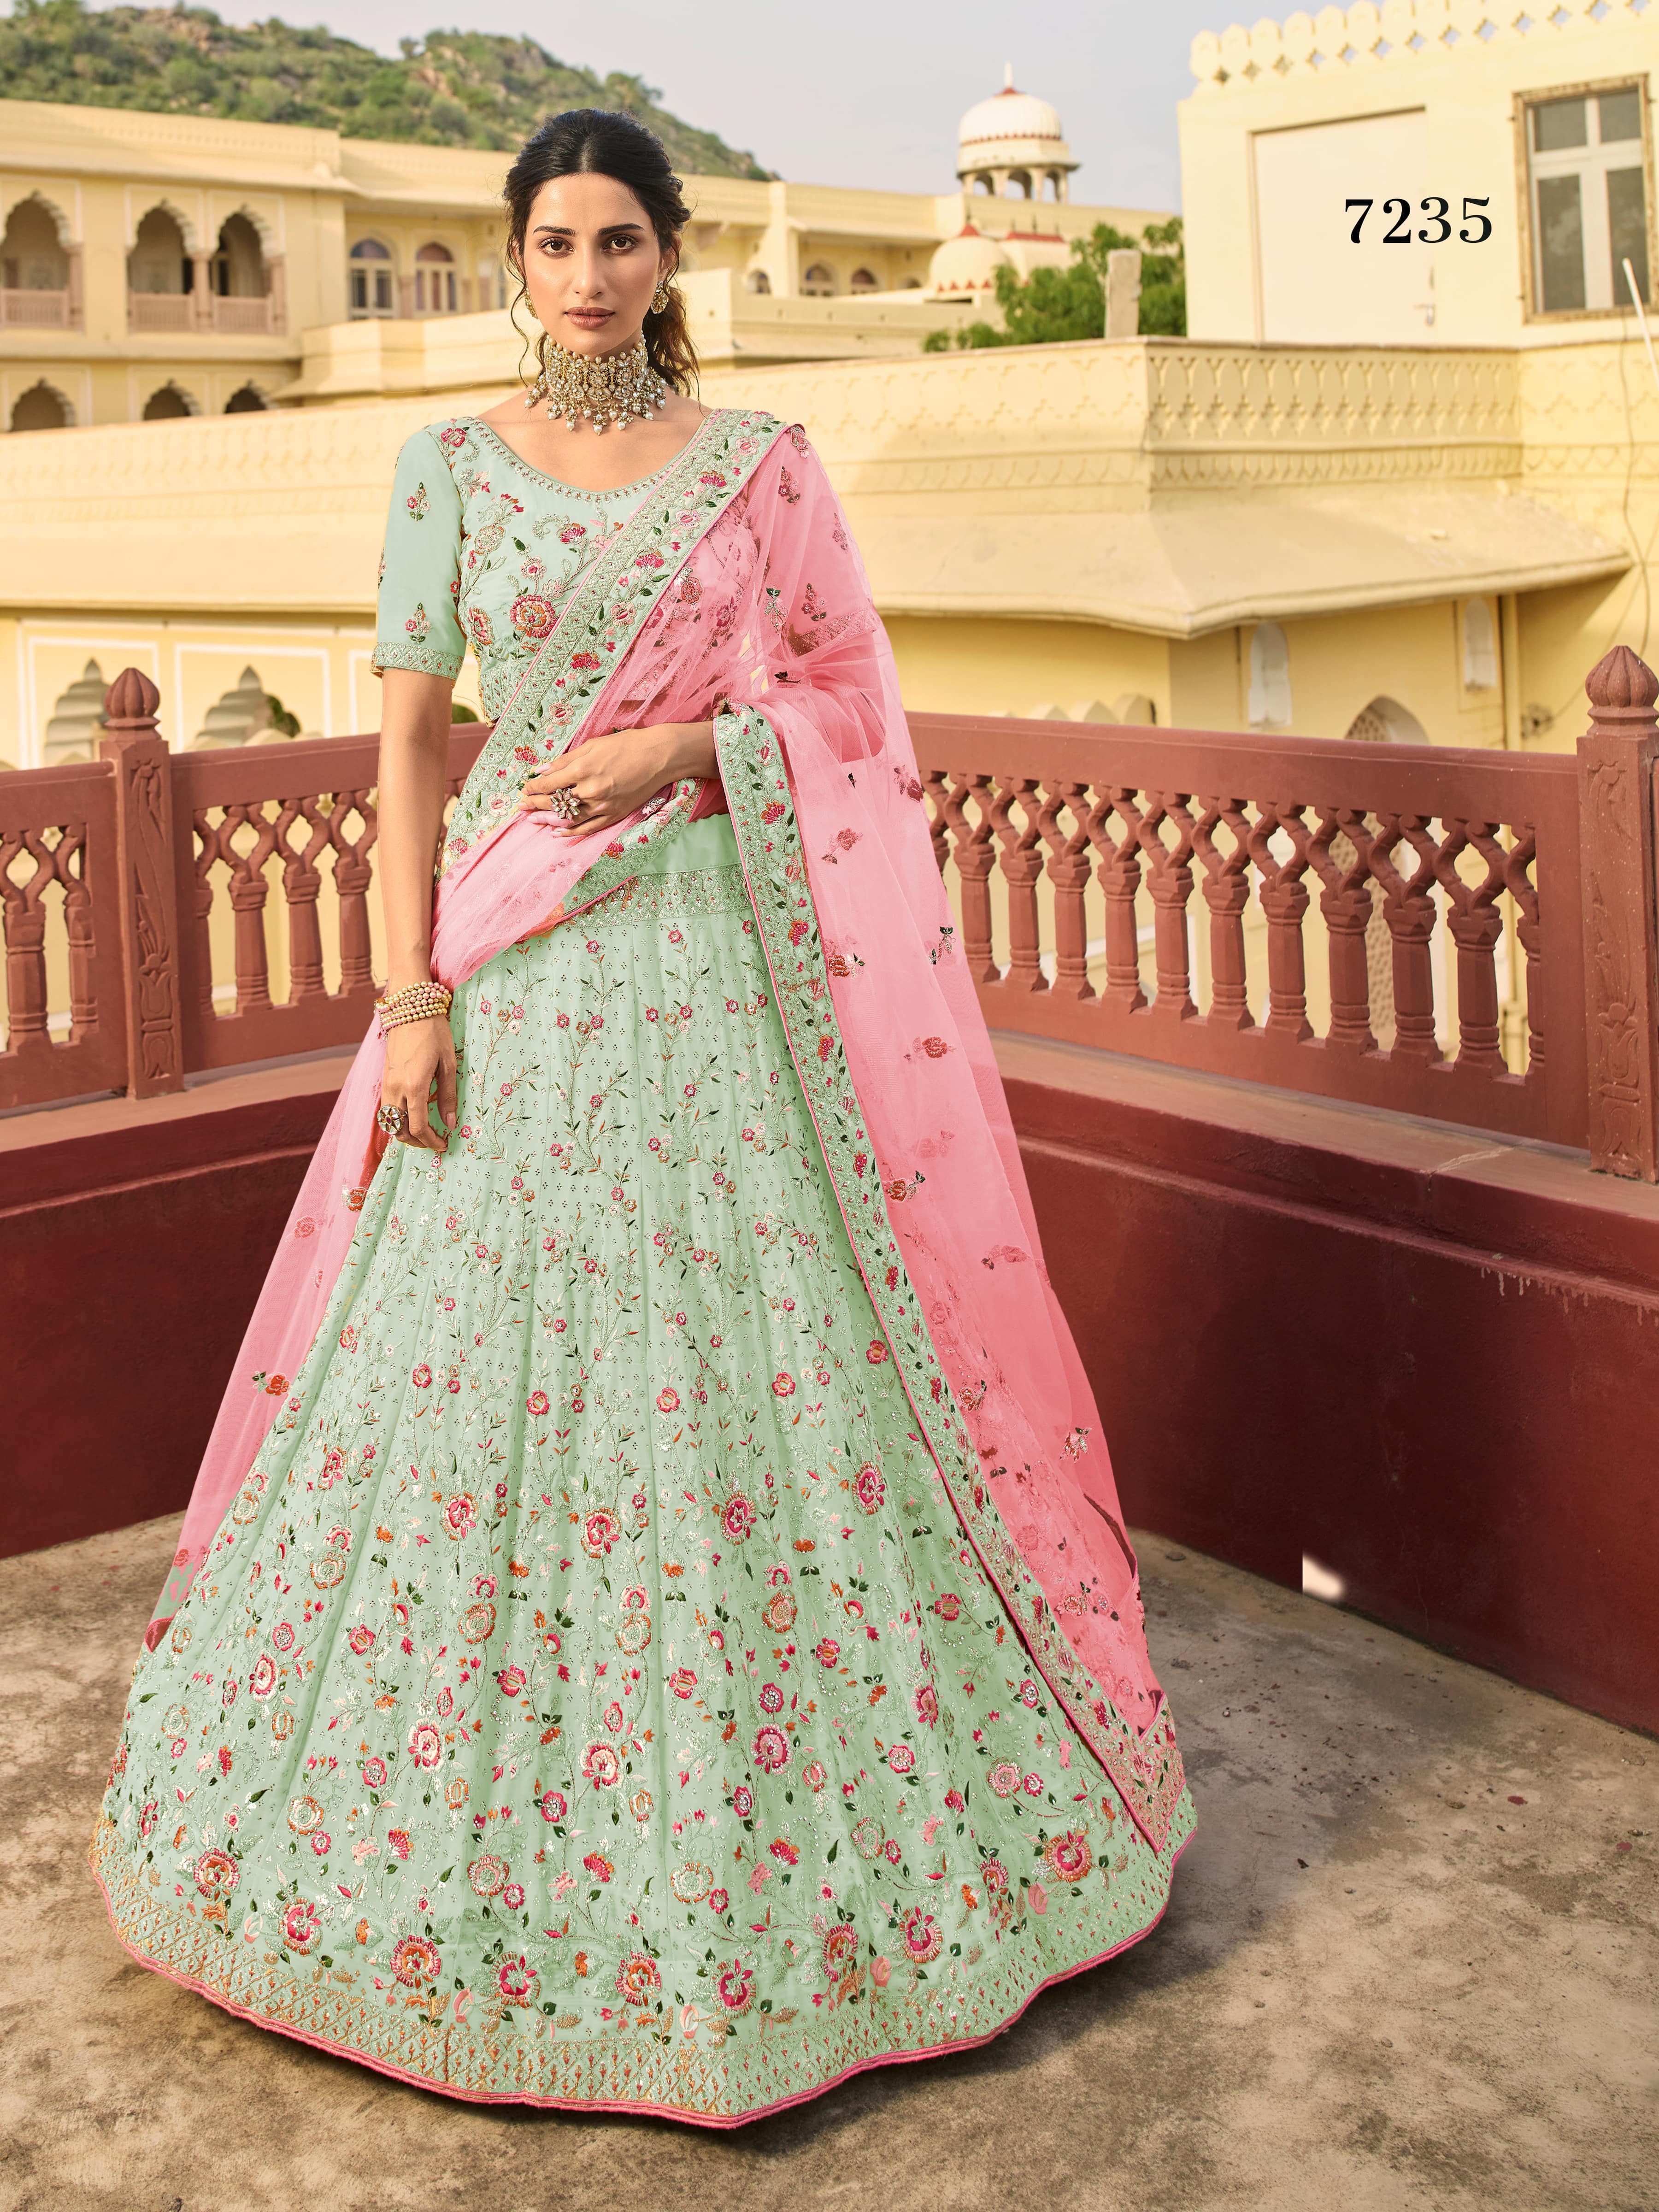 Wedding Wear,Party Wear Semi Stitched Green Floral Designer Lehenga Choli,  2.5 M at Rs 6000 in Surat